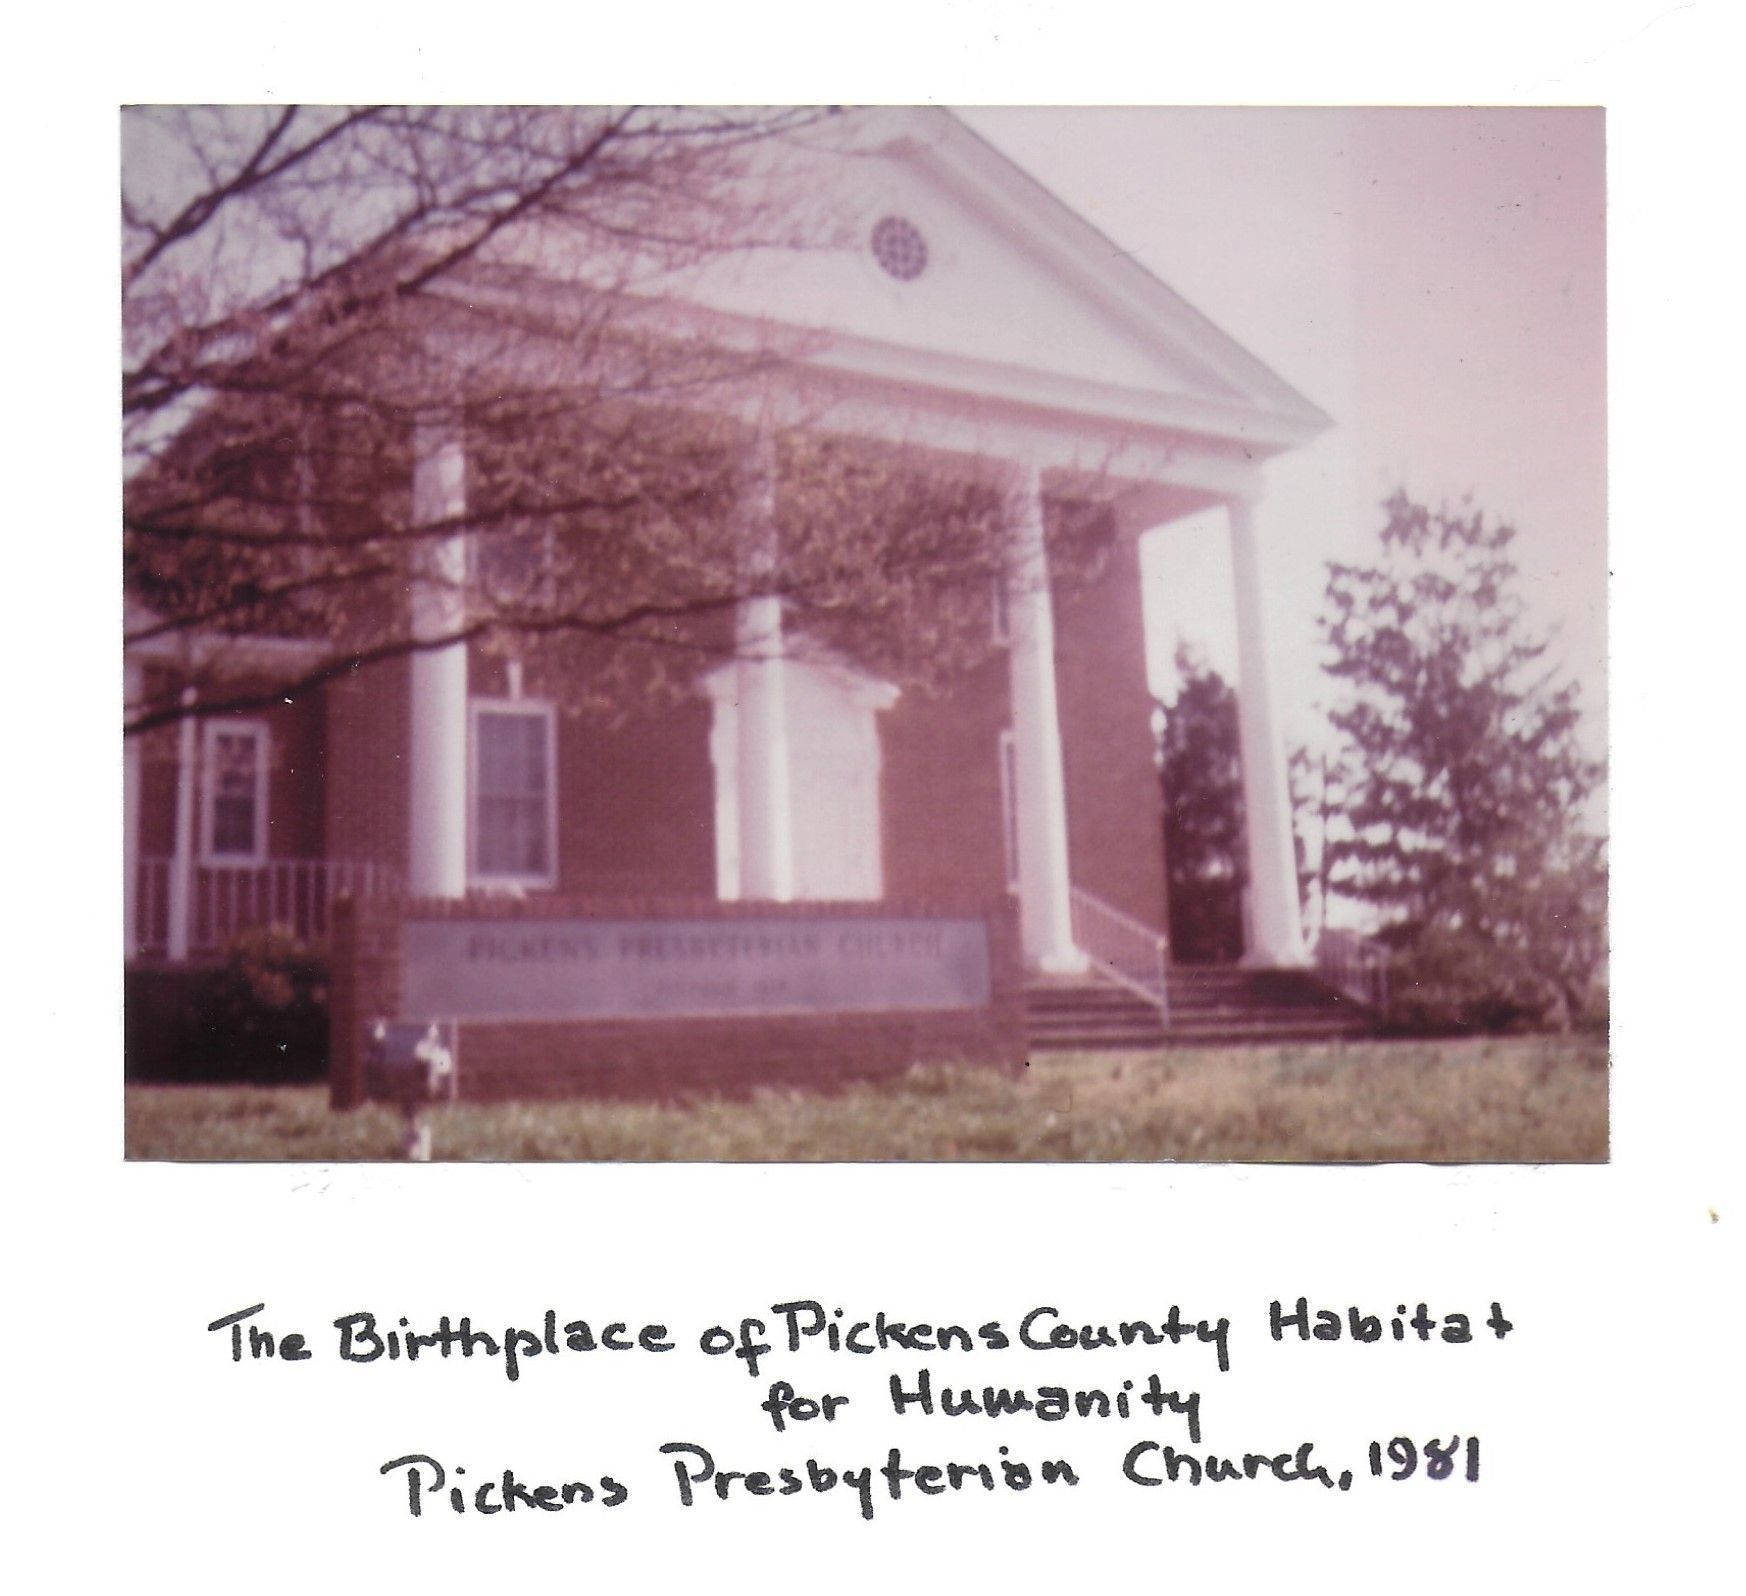 Pickens Presbyterian Church, a brick building with white columns, is pictured in 1981. 